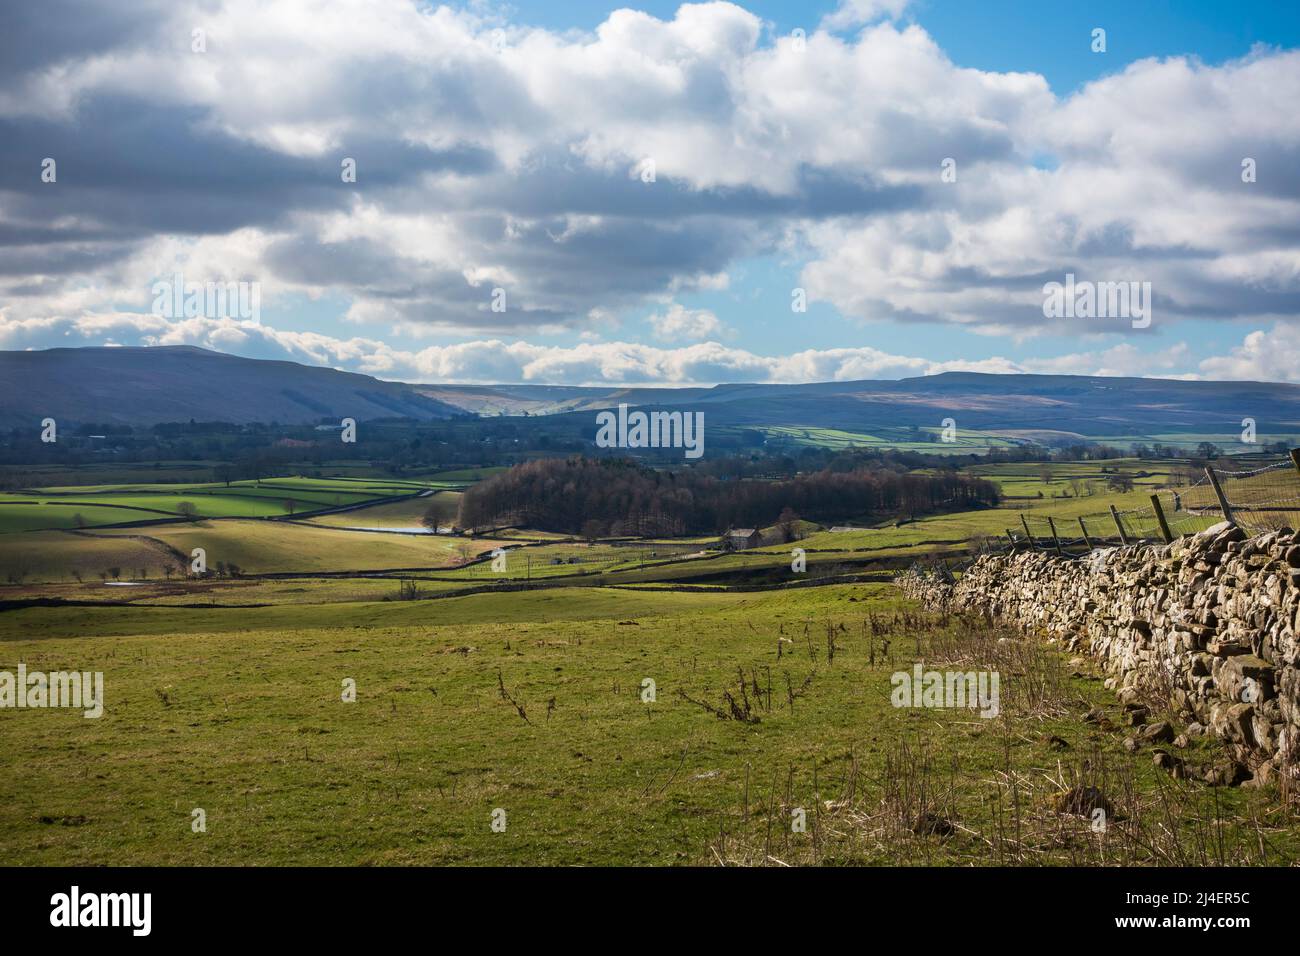 View of Wensleydale from Castle Bolton, Yorkshire Dales National Park. Iconic dry stone walls enclose sheep pastures in early spring. Stock Photo